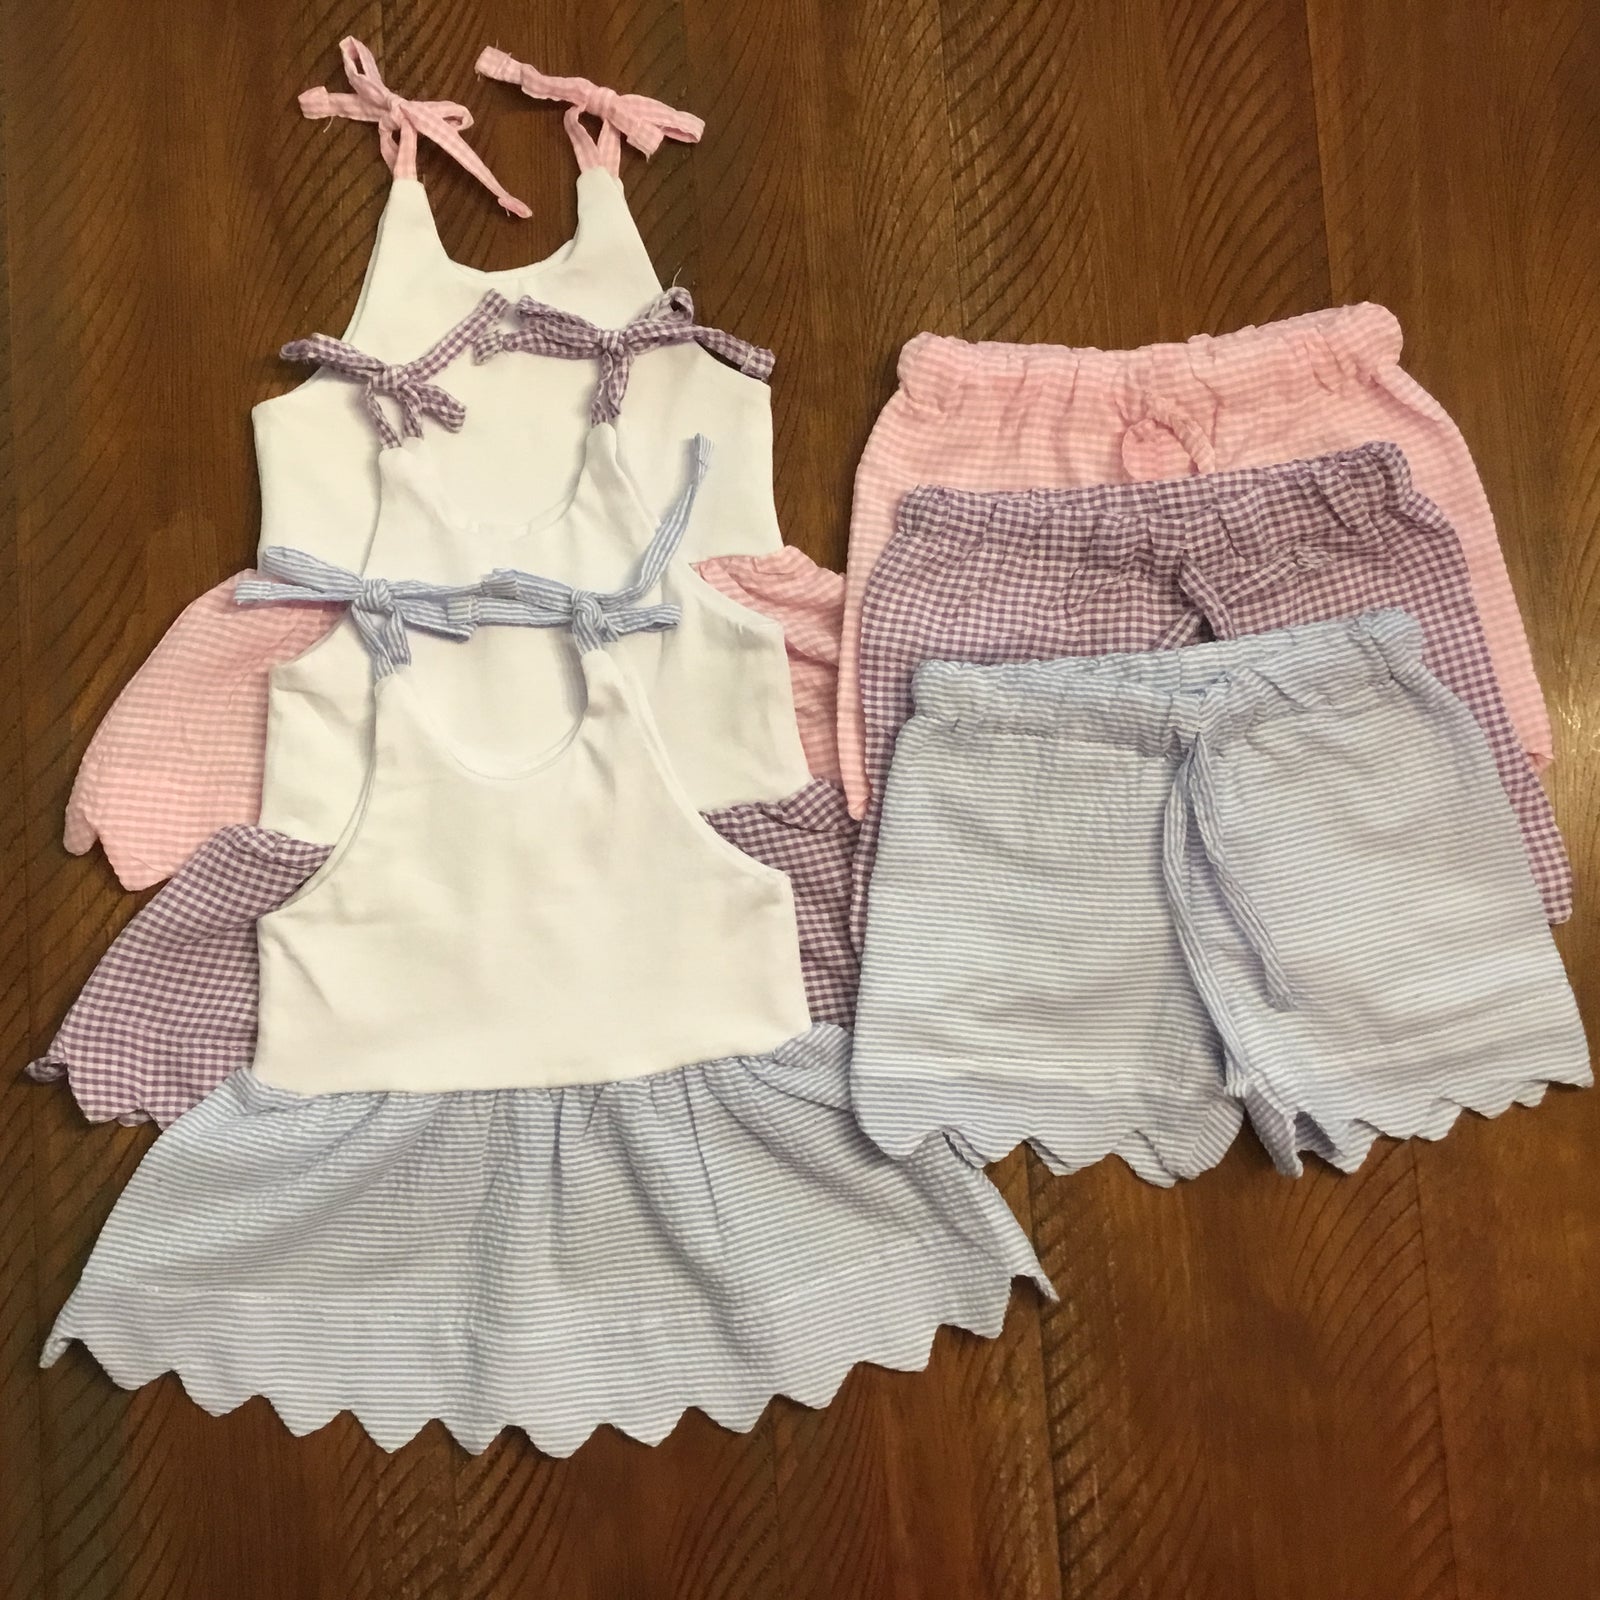 Baby Bloomers (Diaper Cover) with Rear Bow